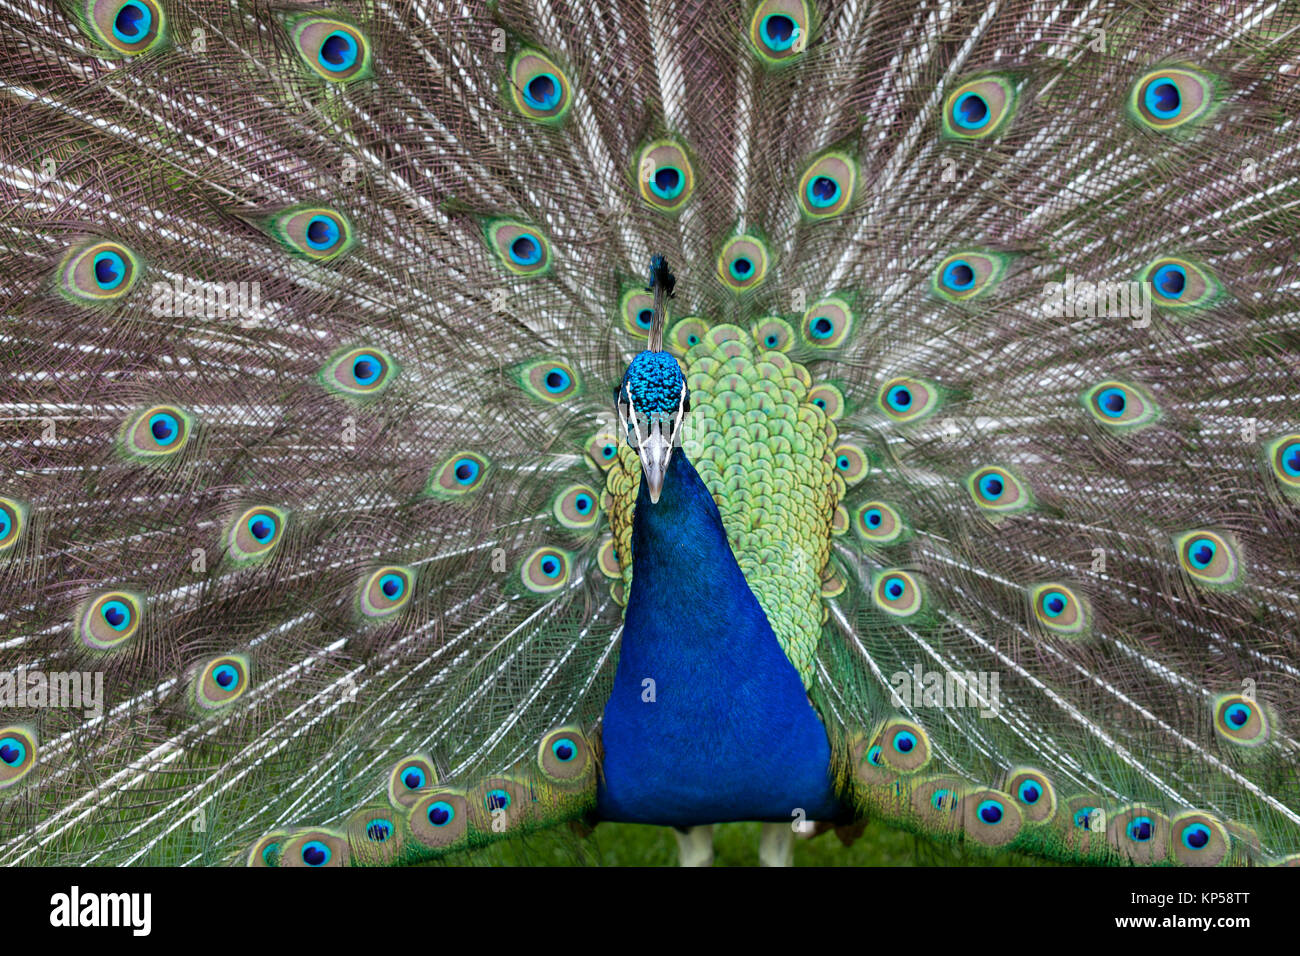 Close up of peacock showing its beautiful feathers Stock Photo